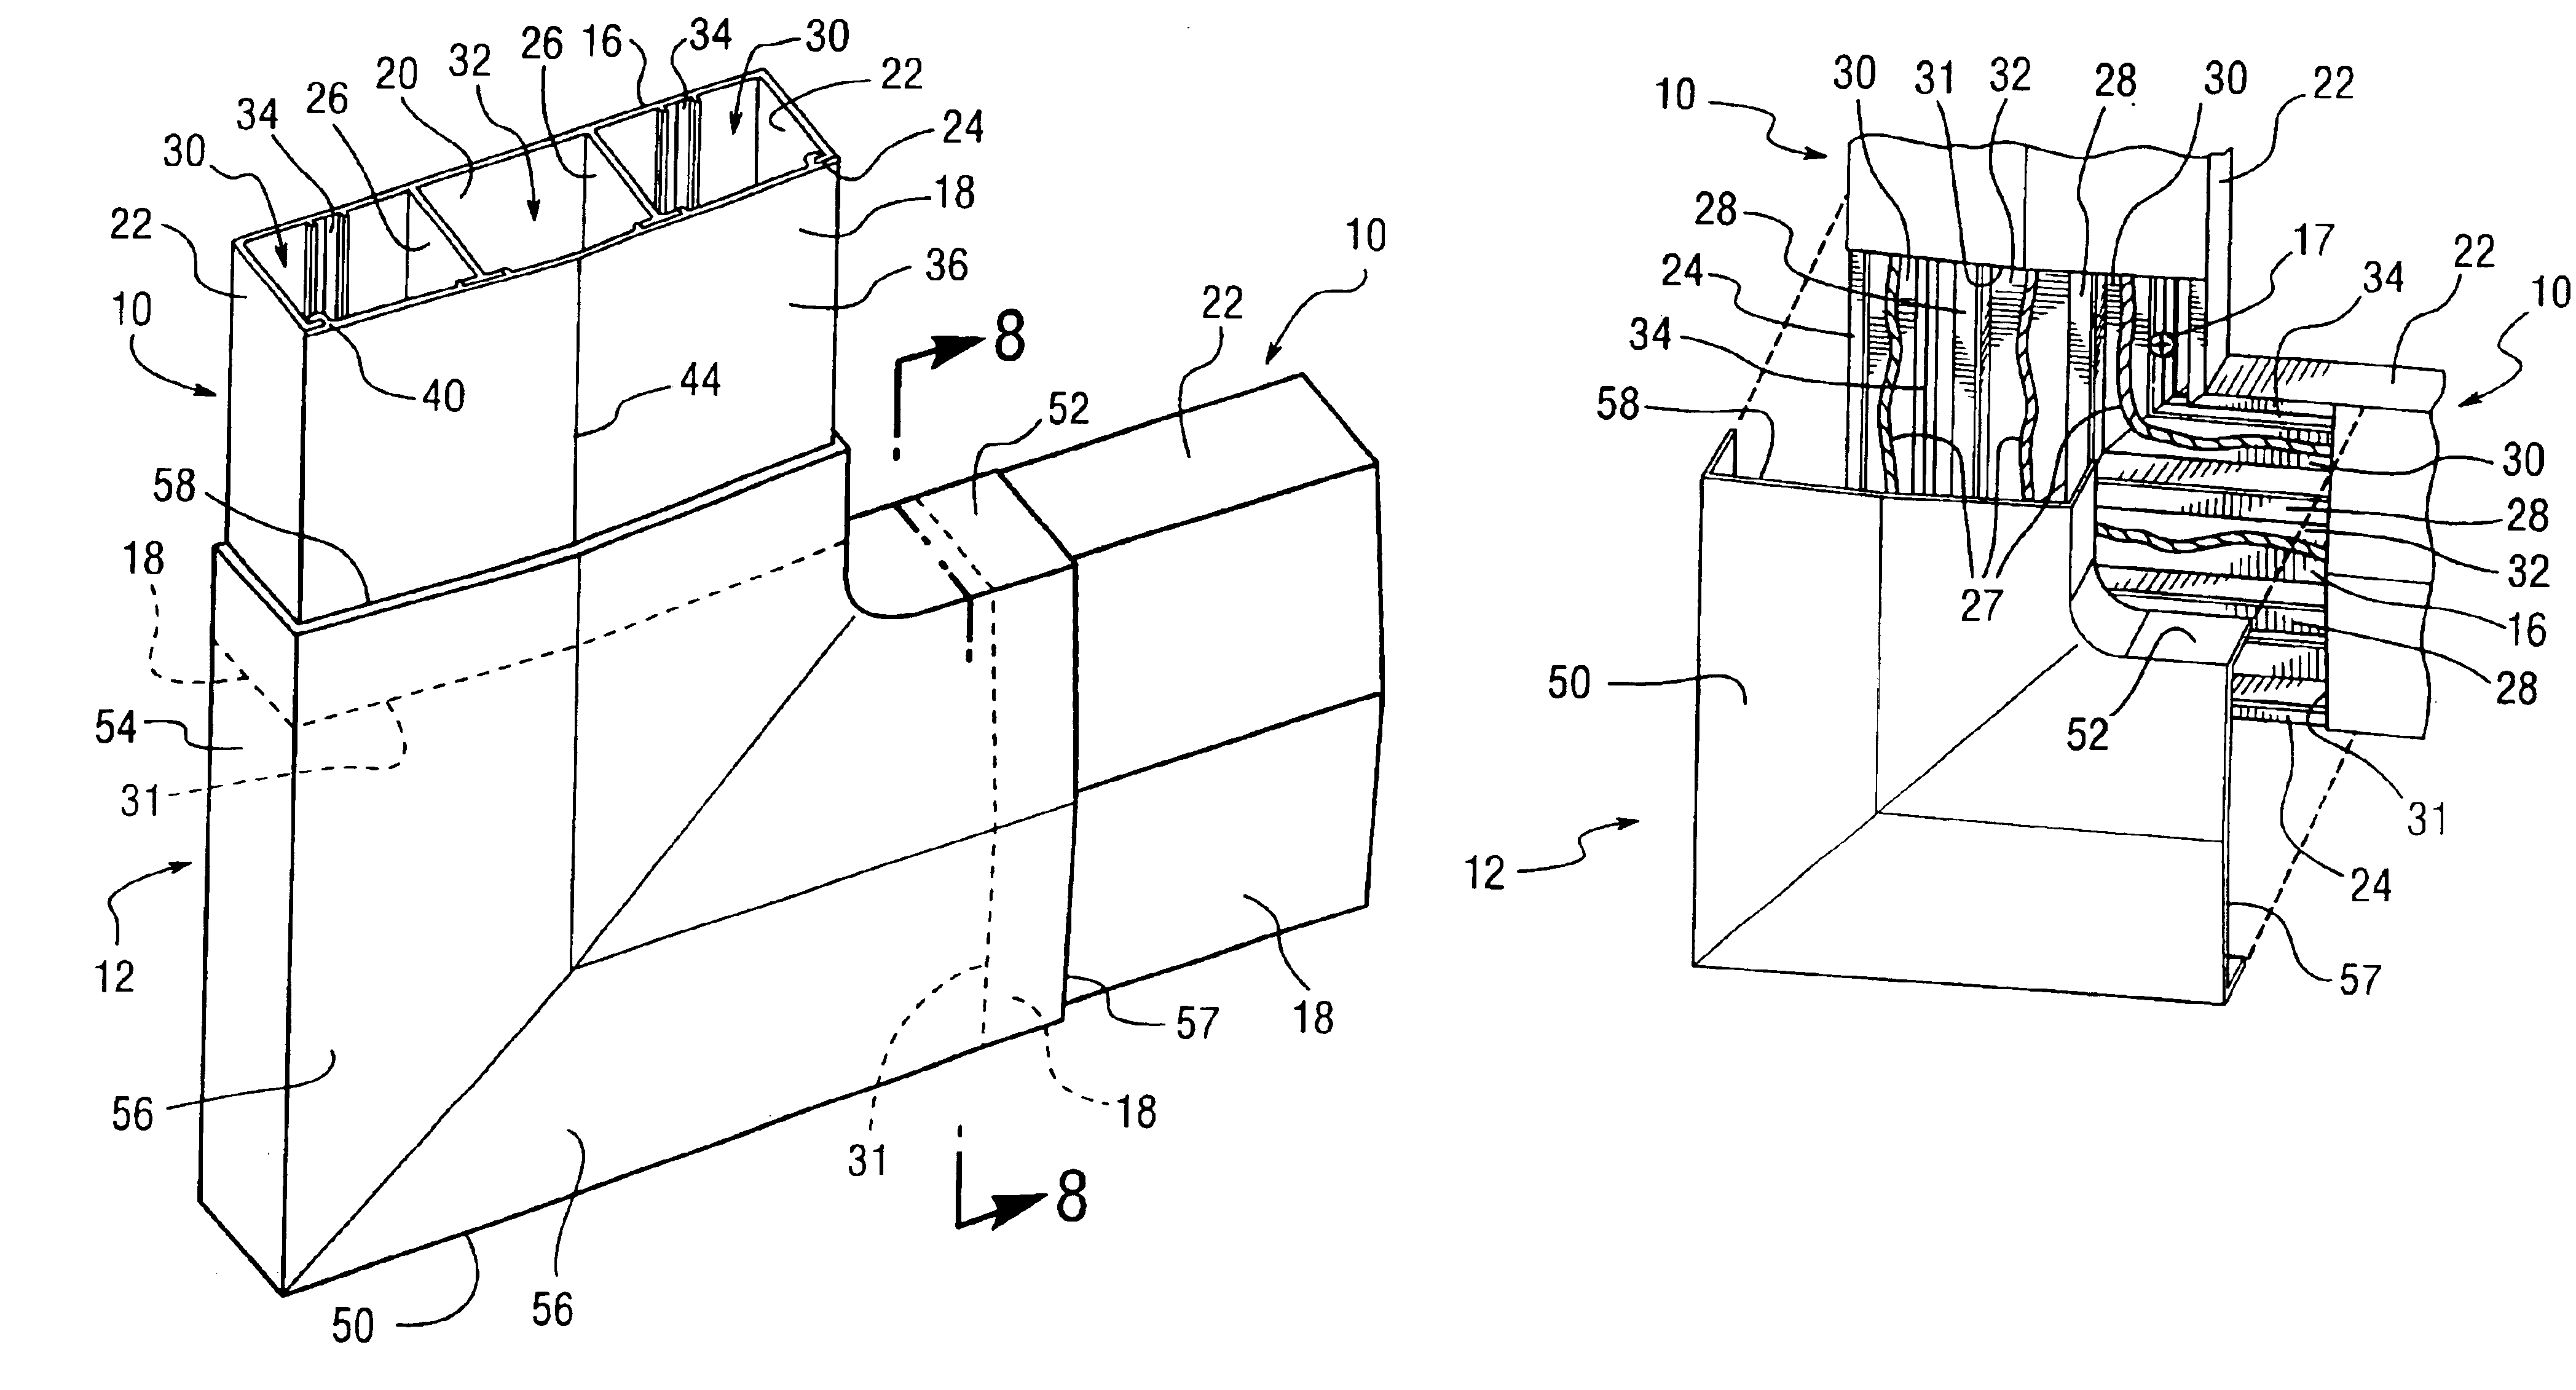 Method of connecting raceways with or without a fitting base